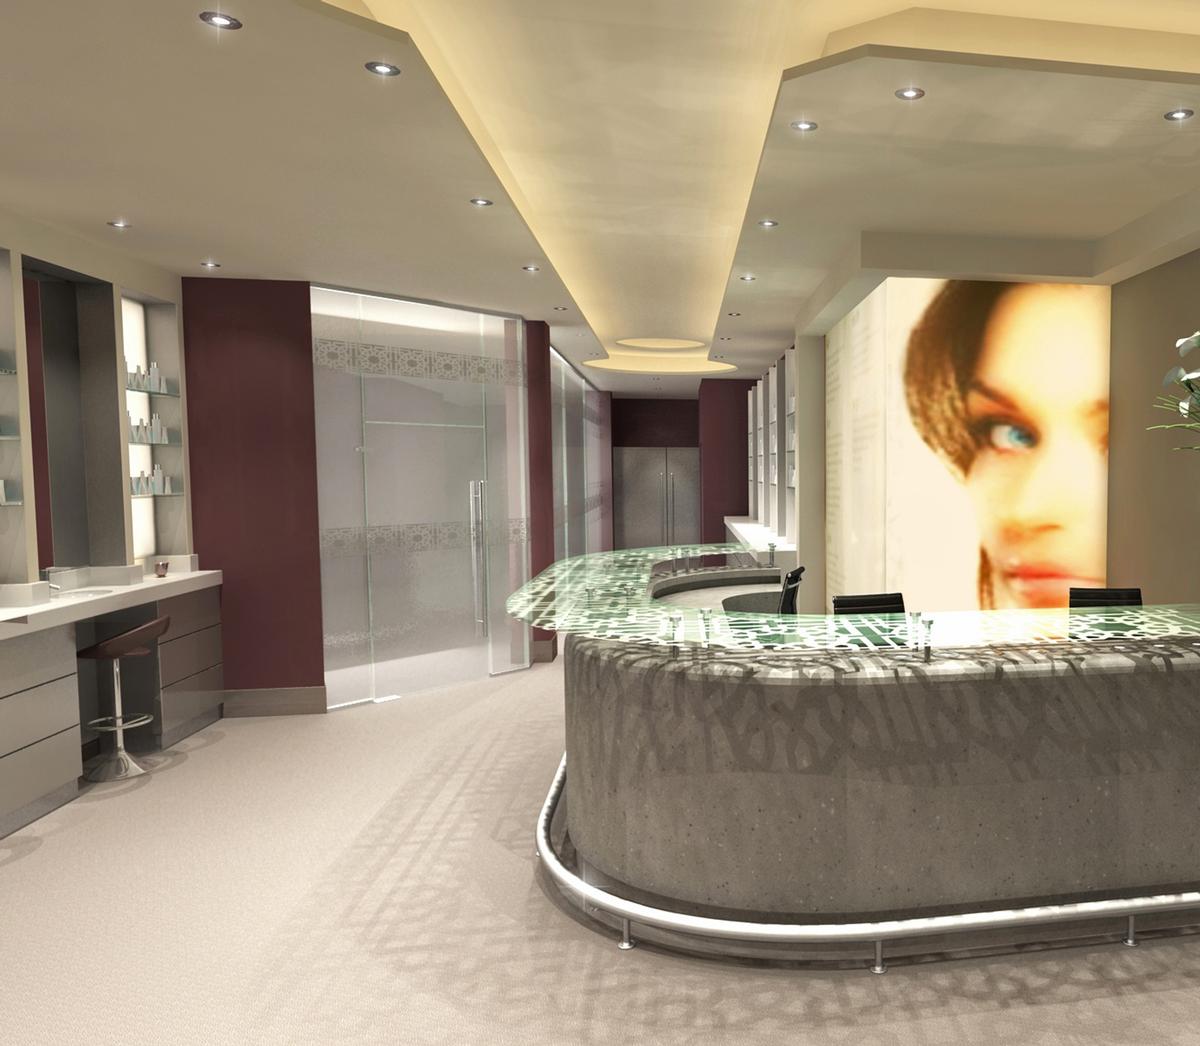 Aesthetic clinic EF Medispa will develop and manage the new 645sq m spa / EF Medispa